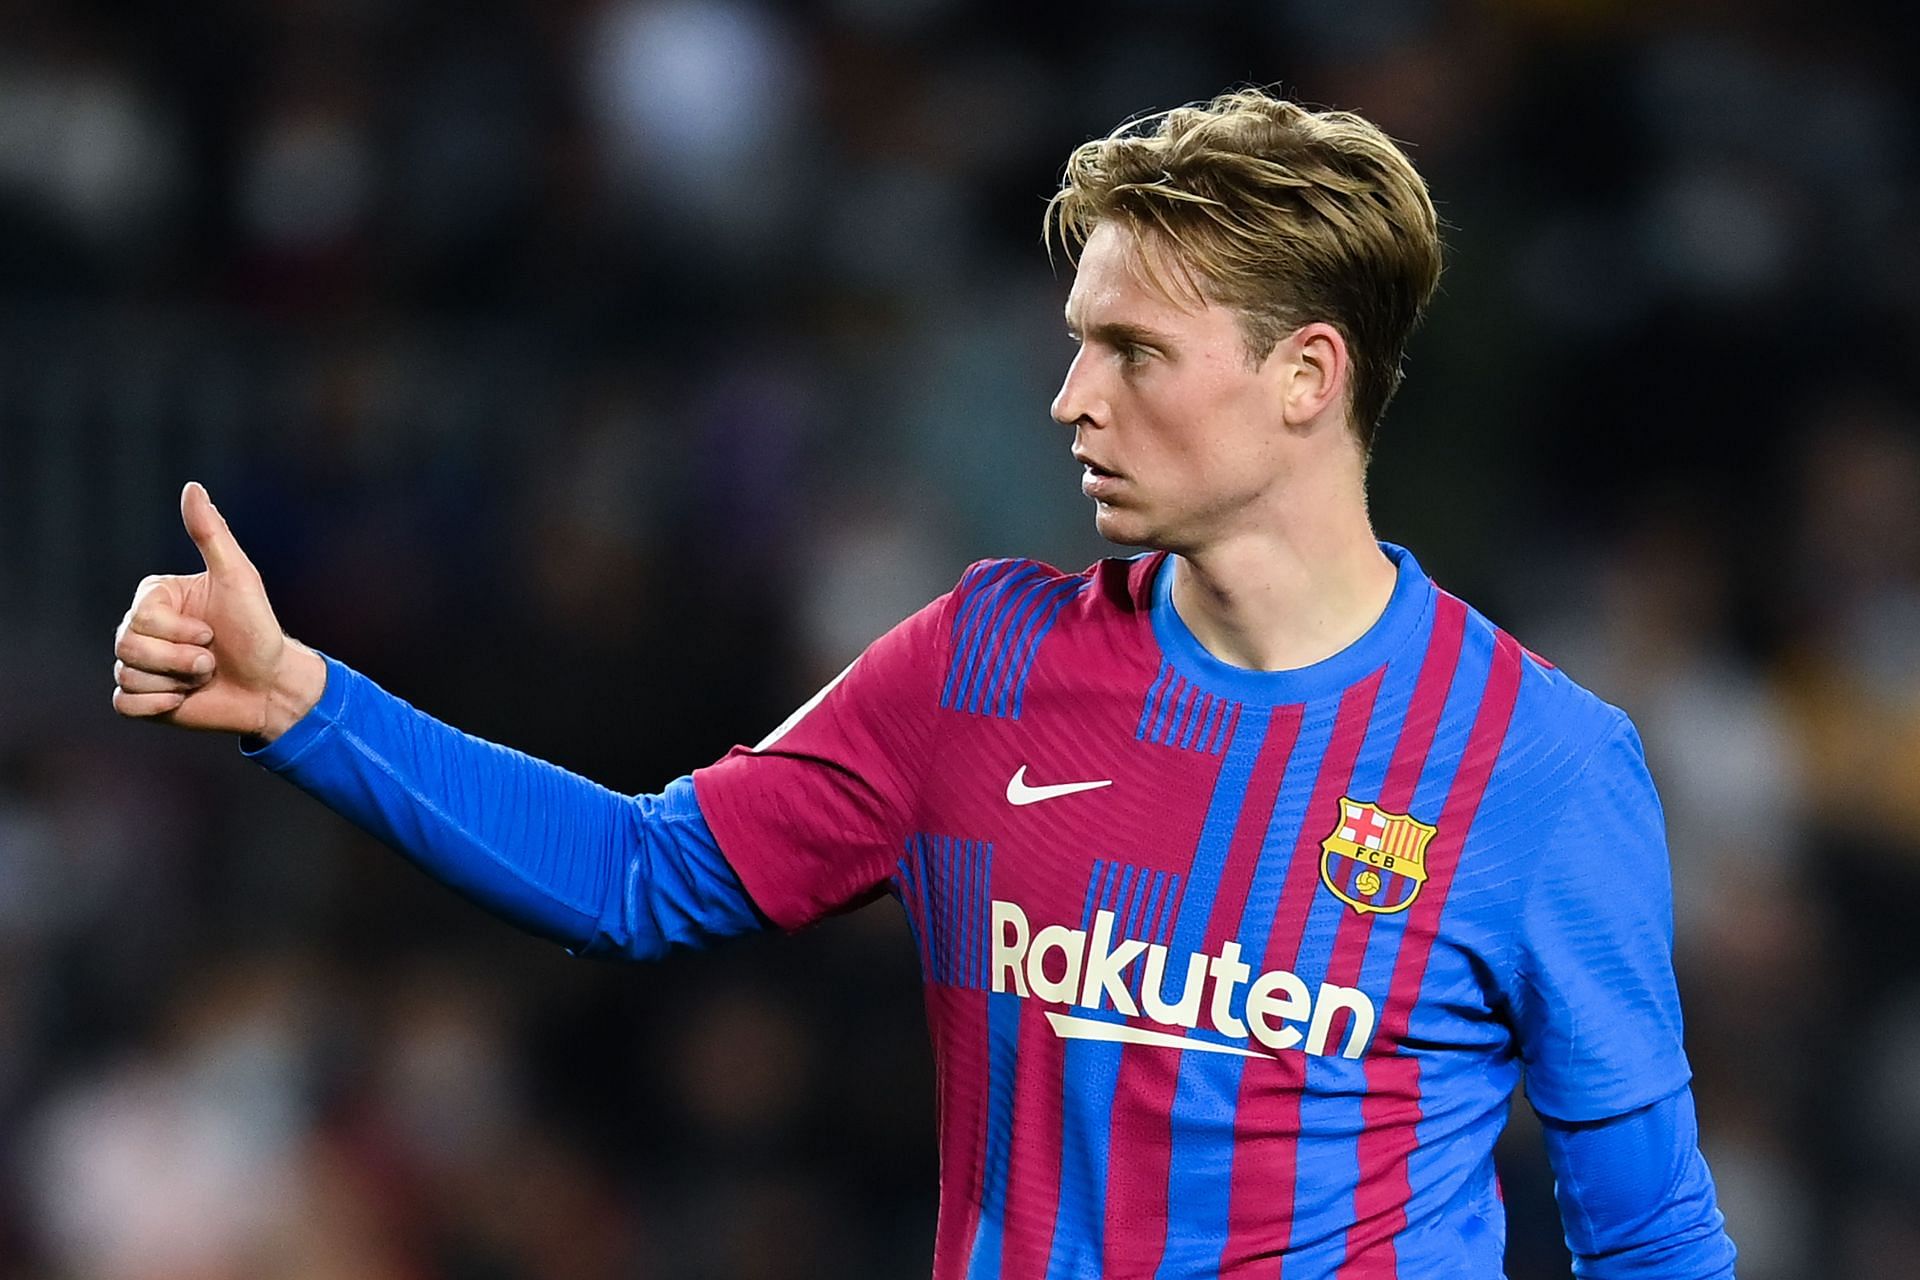 Ranking the 5 highest-paid players at Barcelona currently (2022)